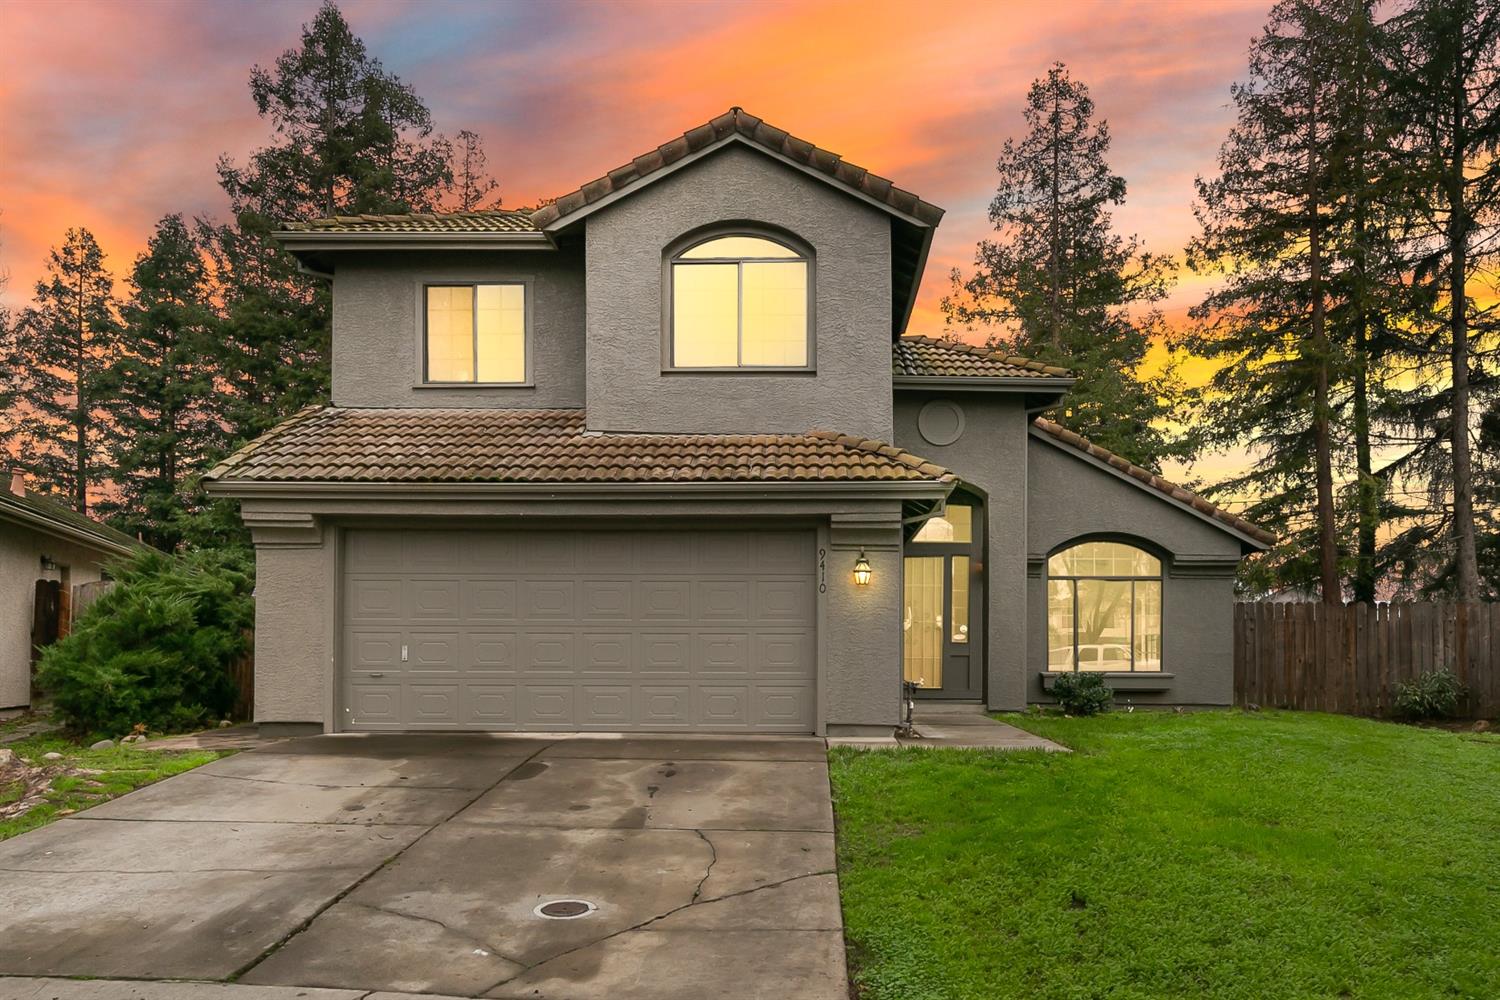 Welcome to this 2 story 4 bedroom, 2.5 bathroom home for sale in Elk Grove. The entrance of the home